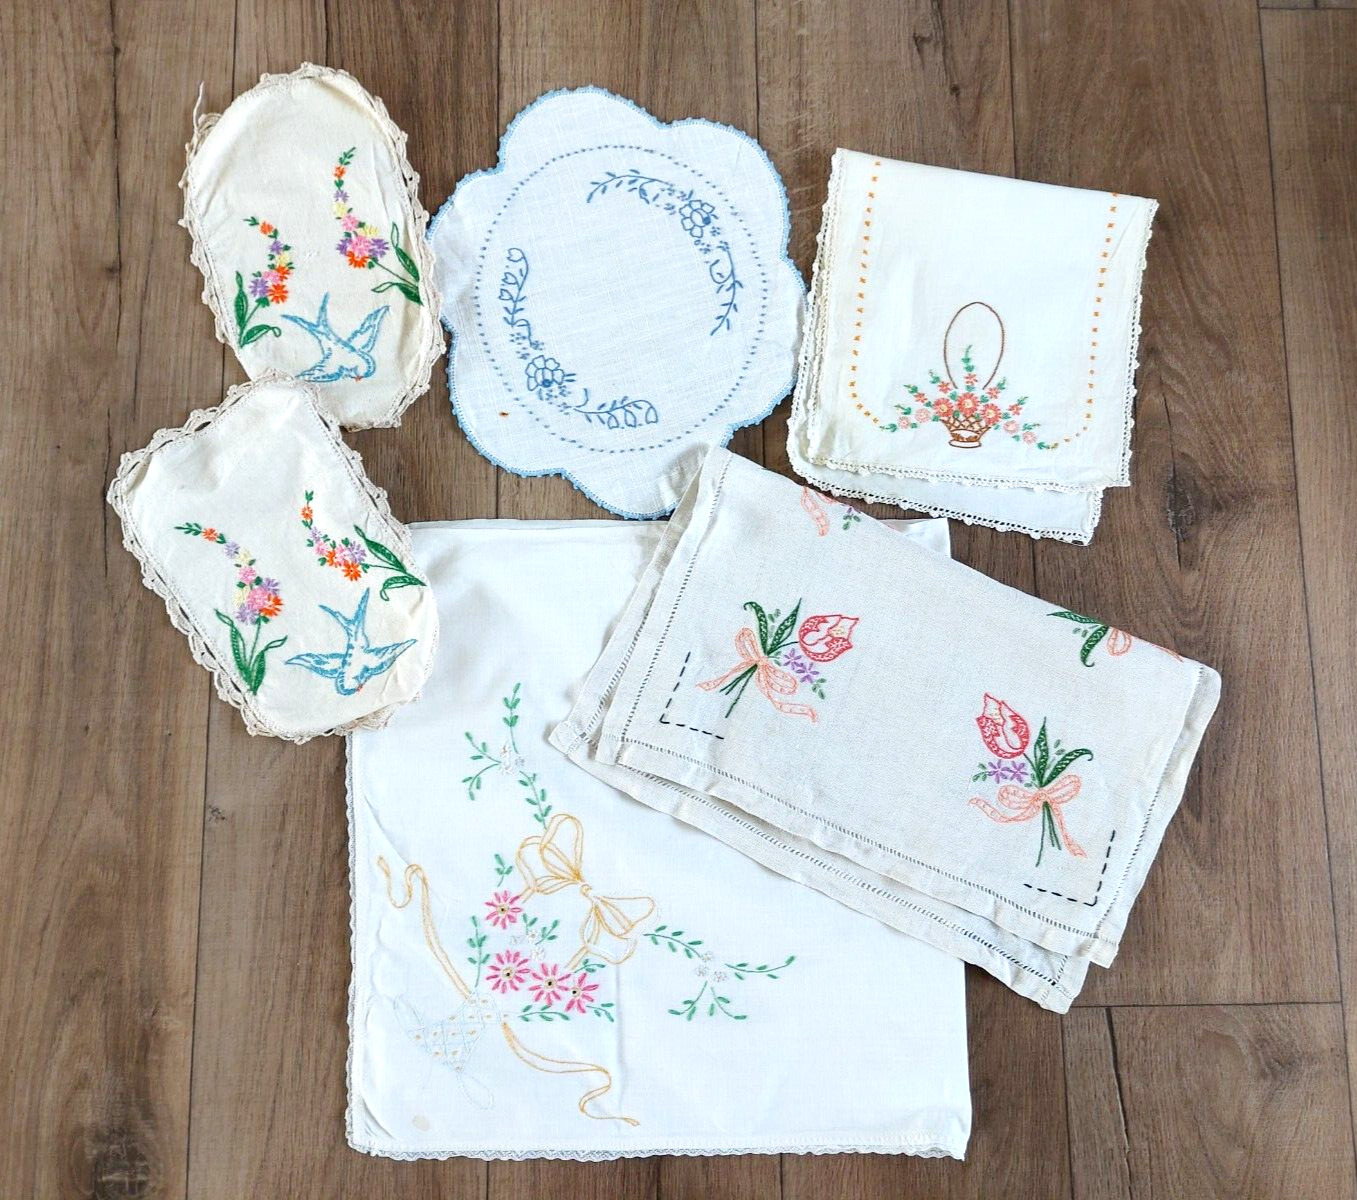 Vintage Hand Embroidered Floral Flower Textiles Linens Assorted Misc Lot of 6